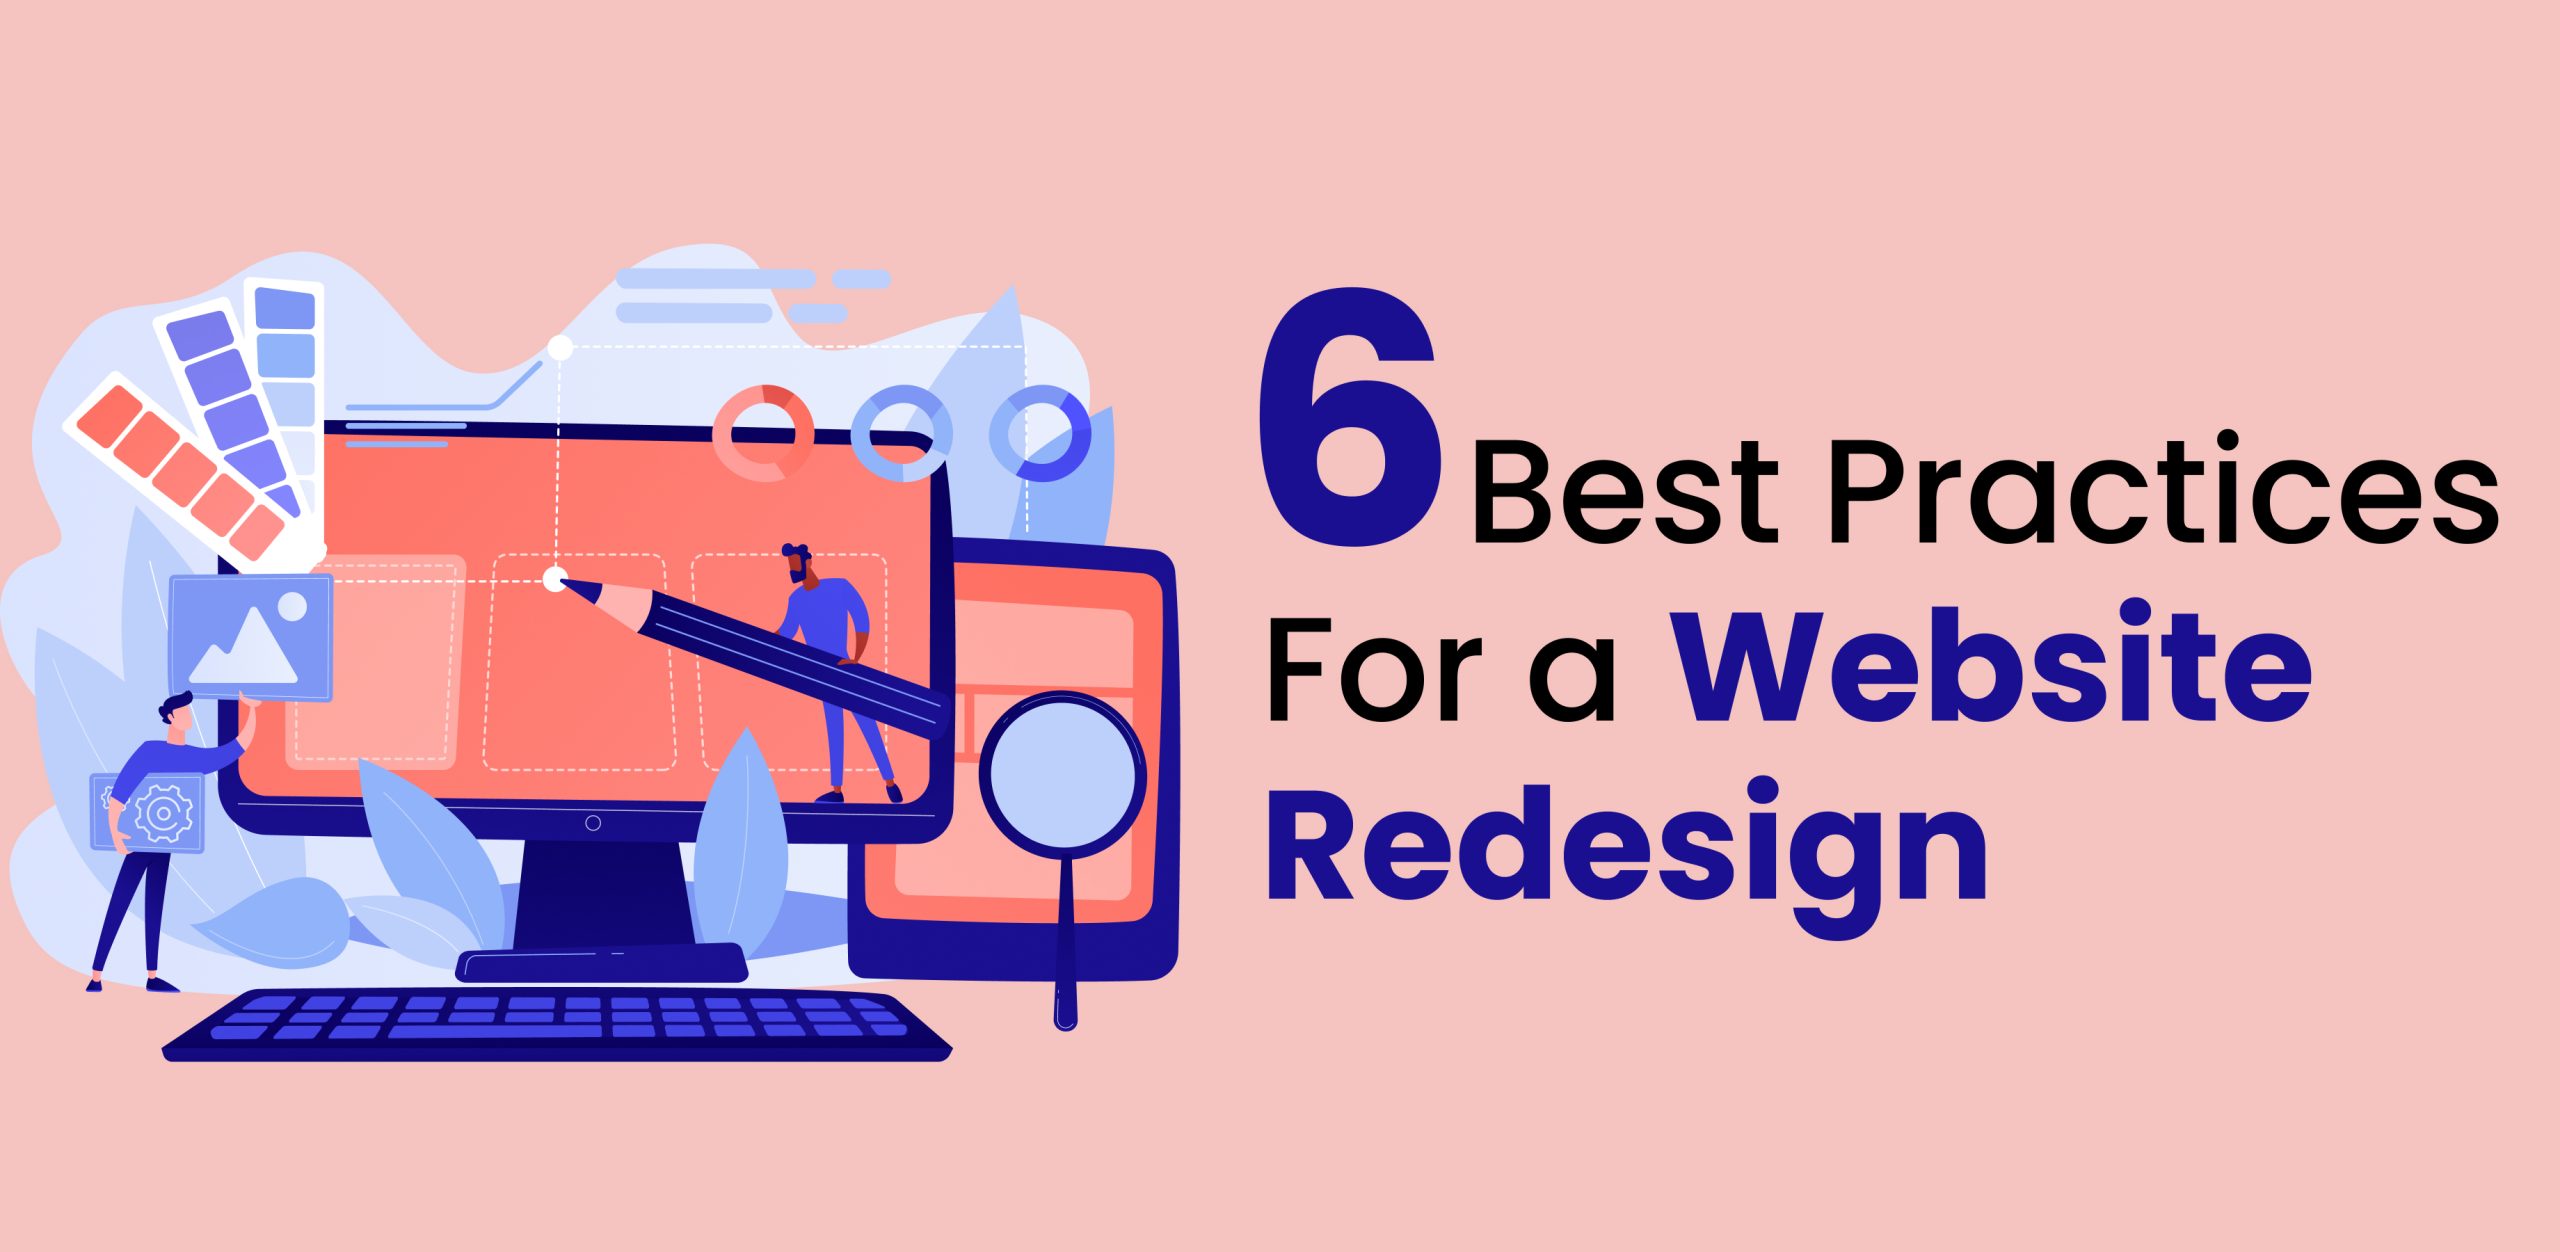 6 Best Practices For a Website Redesign